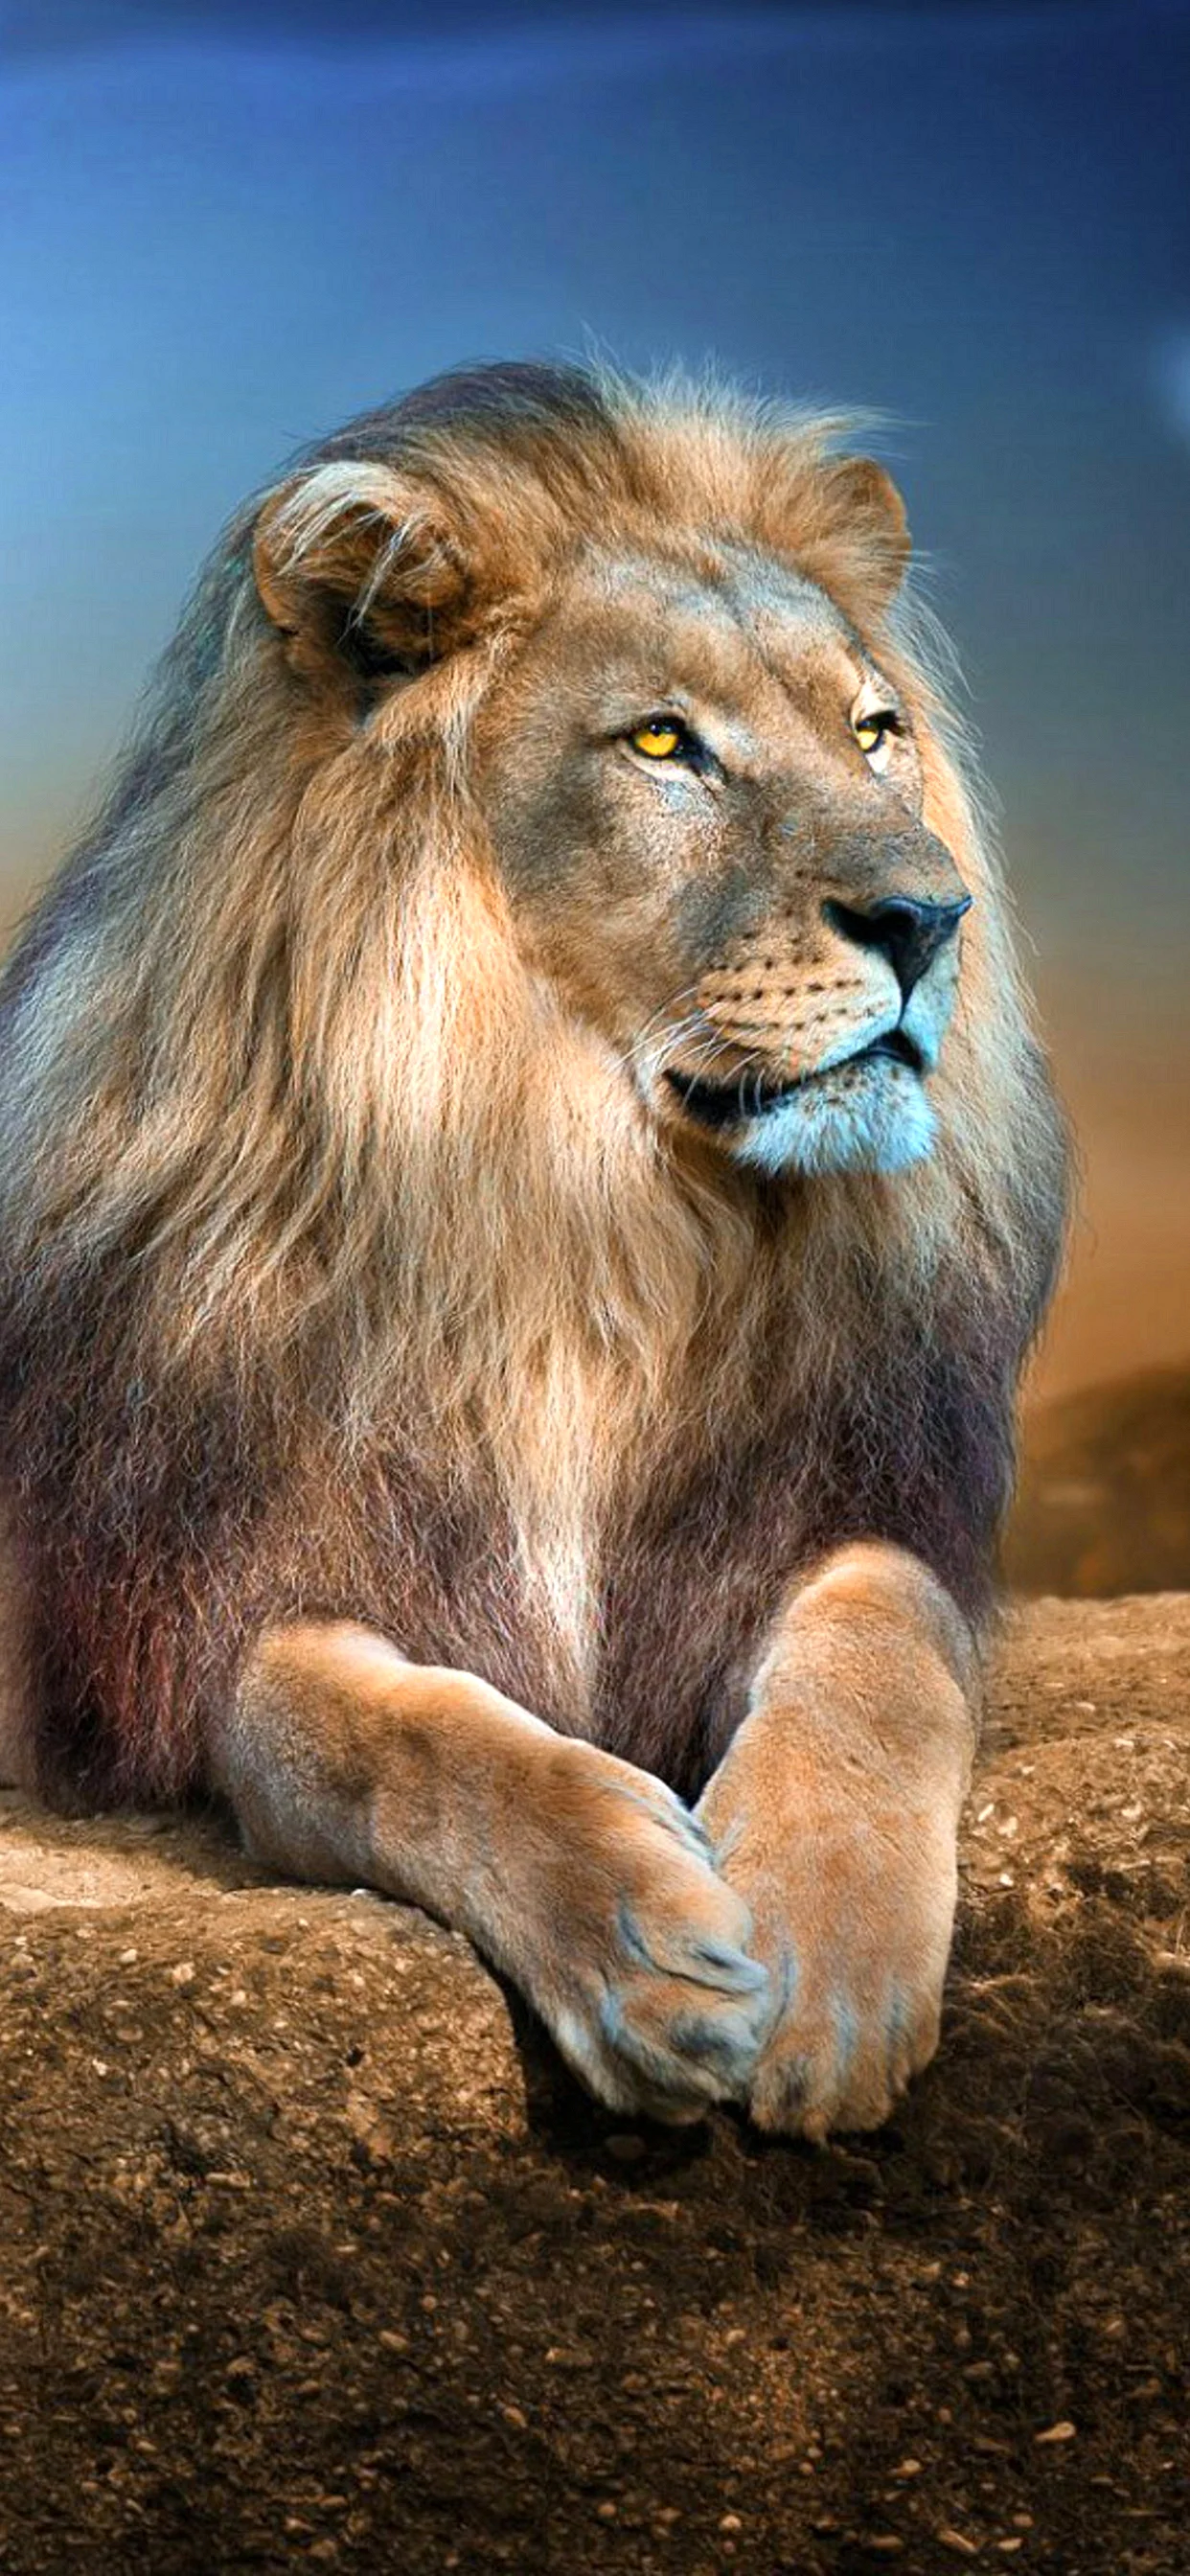 Lion Wallpaper for iPhone 11 Pro Max